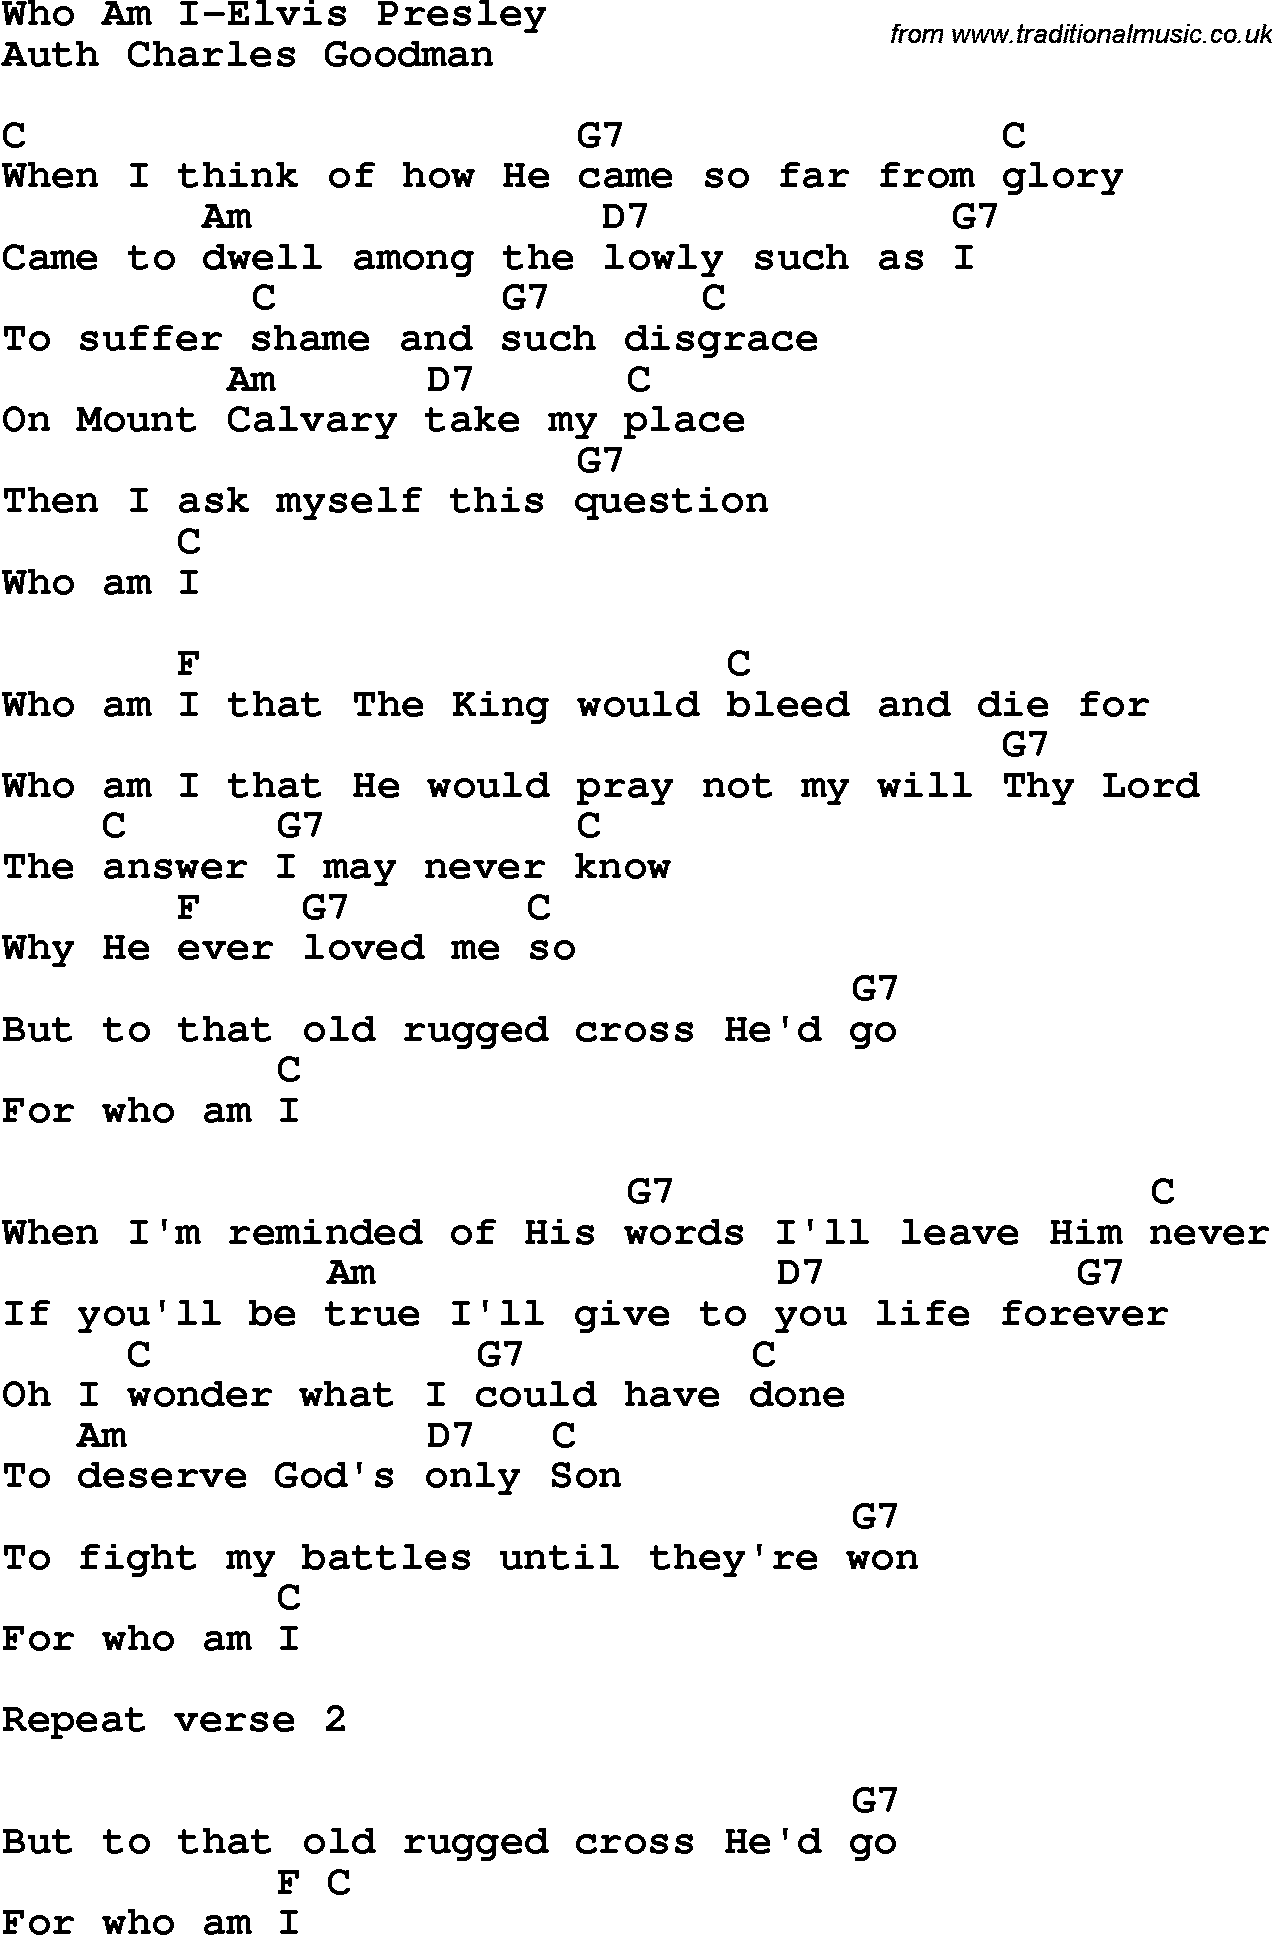 Country, Southern and Bluegrass Gospel Song Who Am I-Elvis Presley lyrics and chords